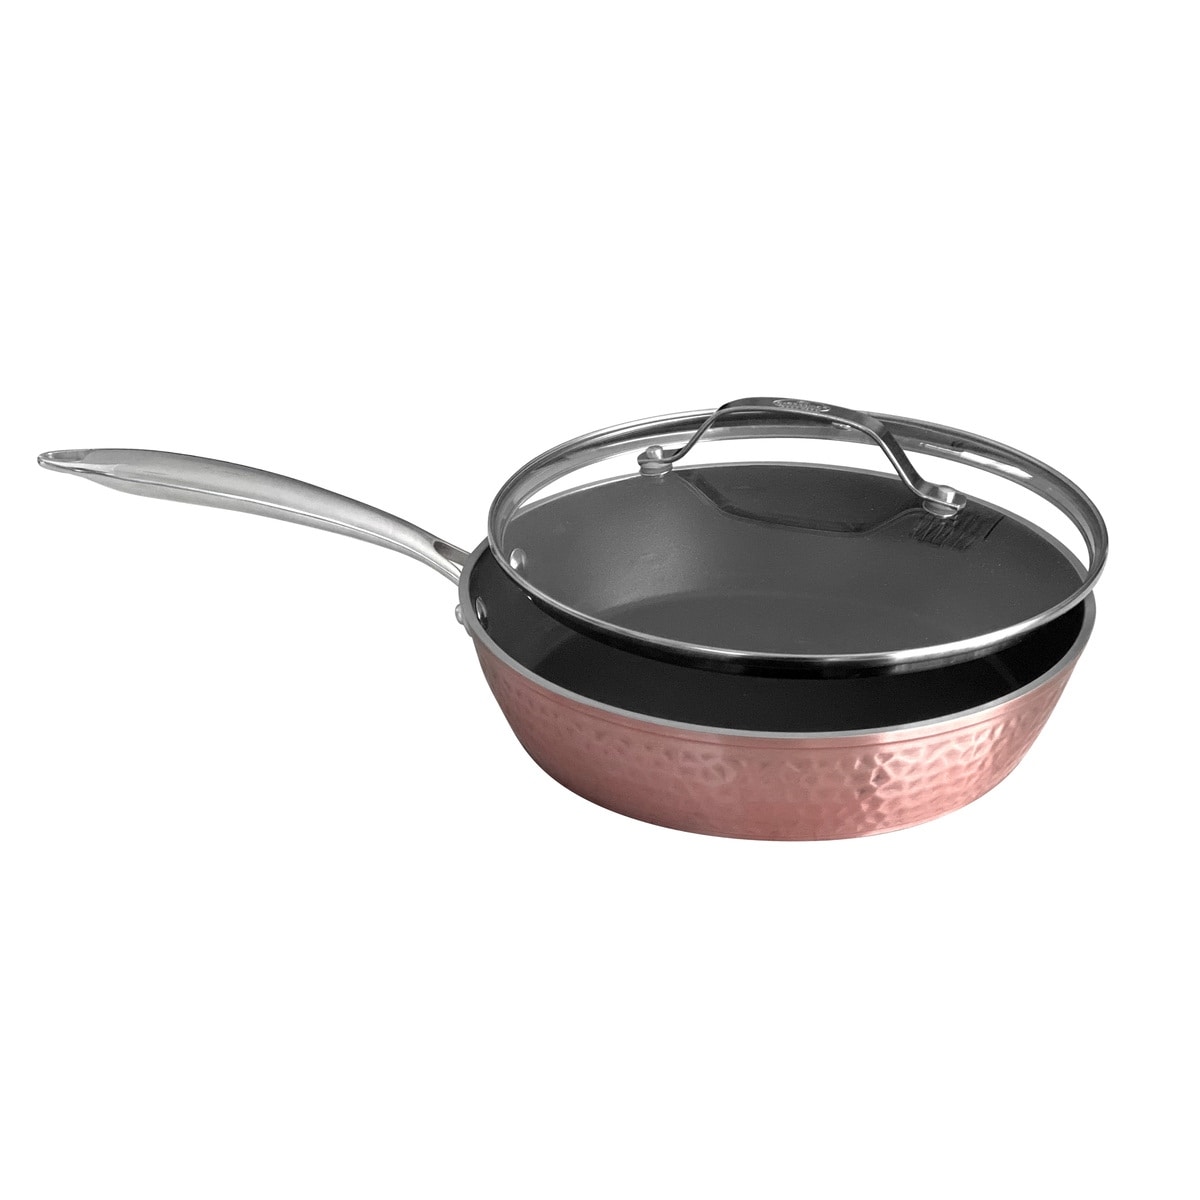 https://ak1.ostkcdn.com/images/products/is/images/direct/764dff43cfc4146b48374c73144daa770bf2b8e5/Orgreenic-9.5-inch-Hammered-Rose-Pan-with-Lid.jpg